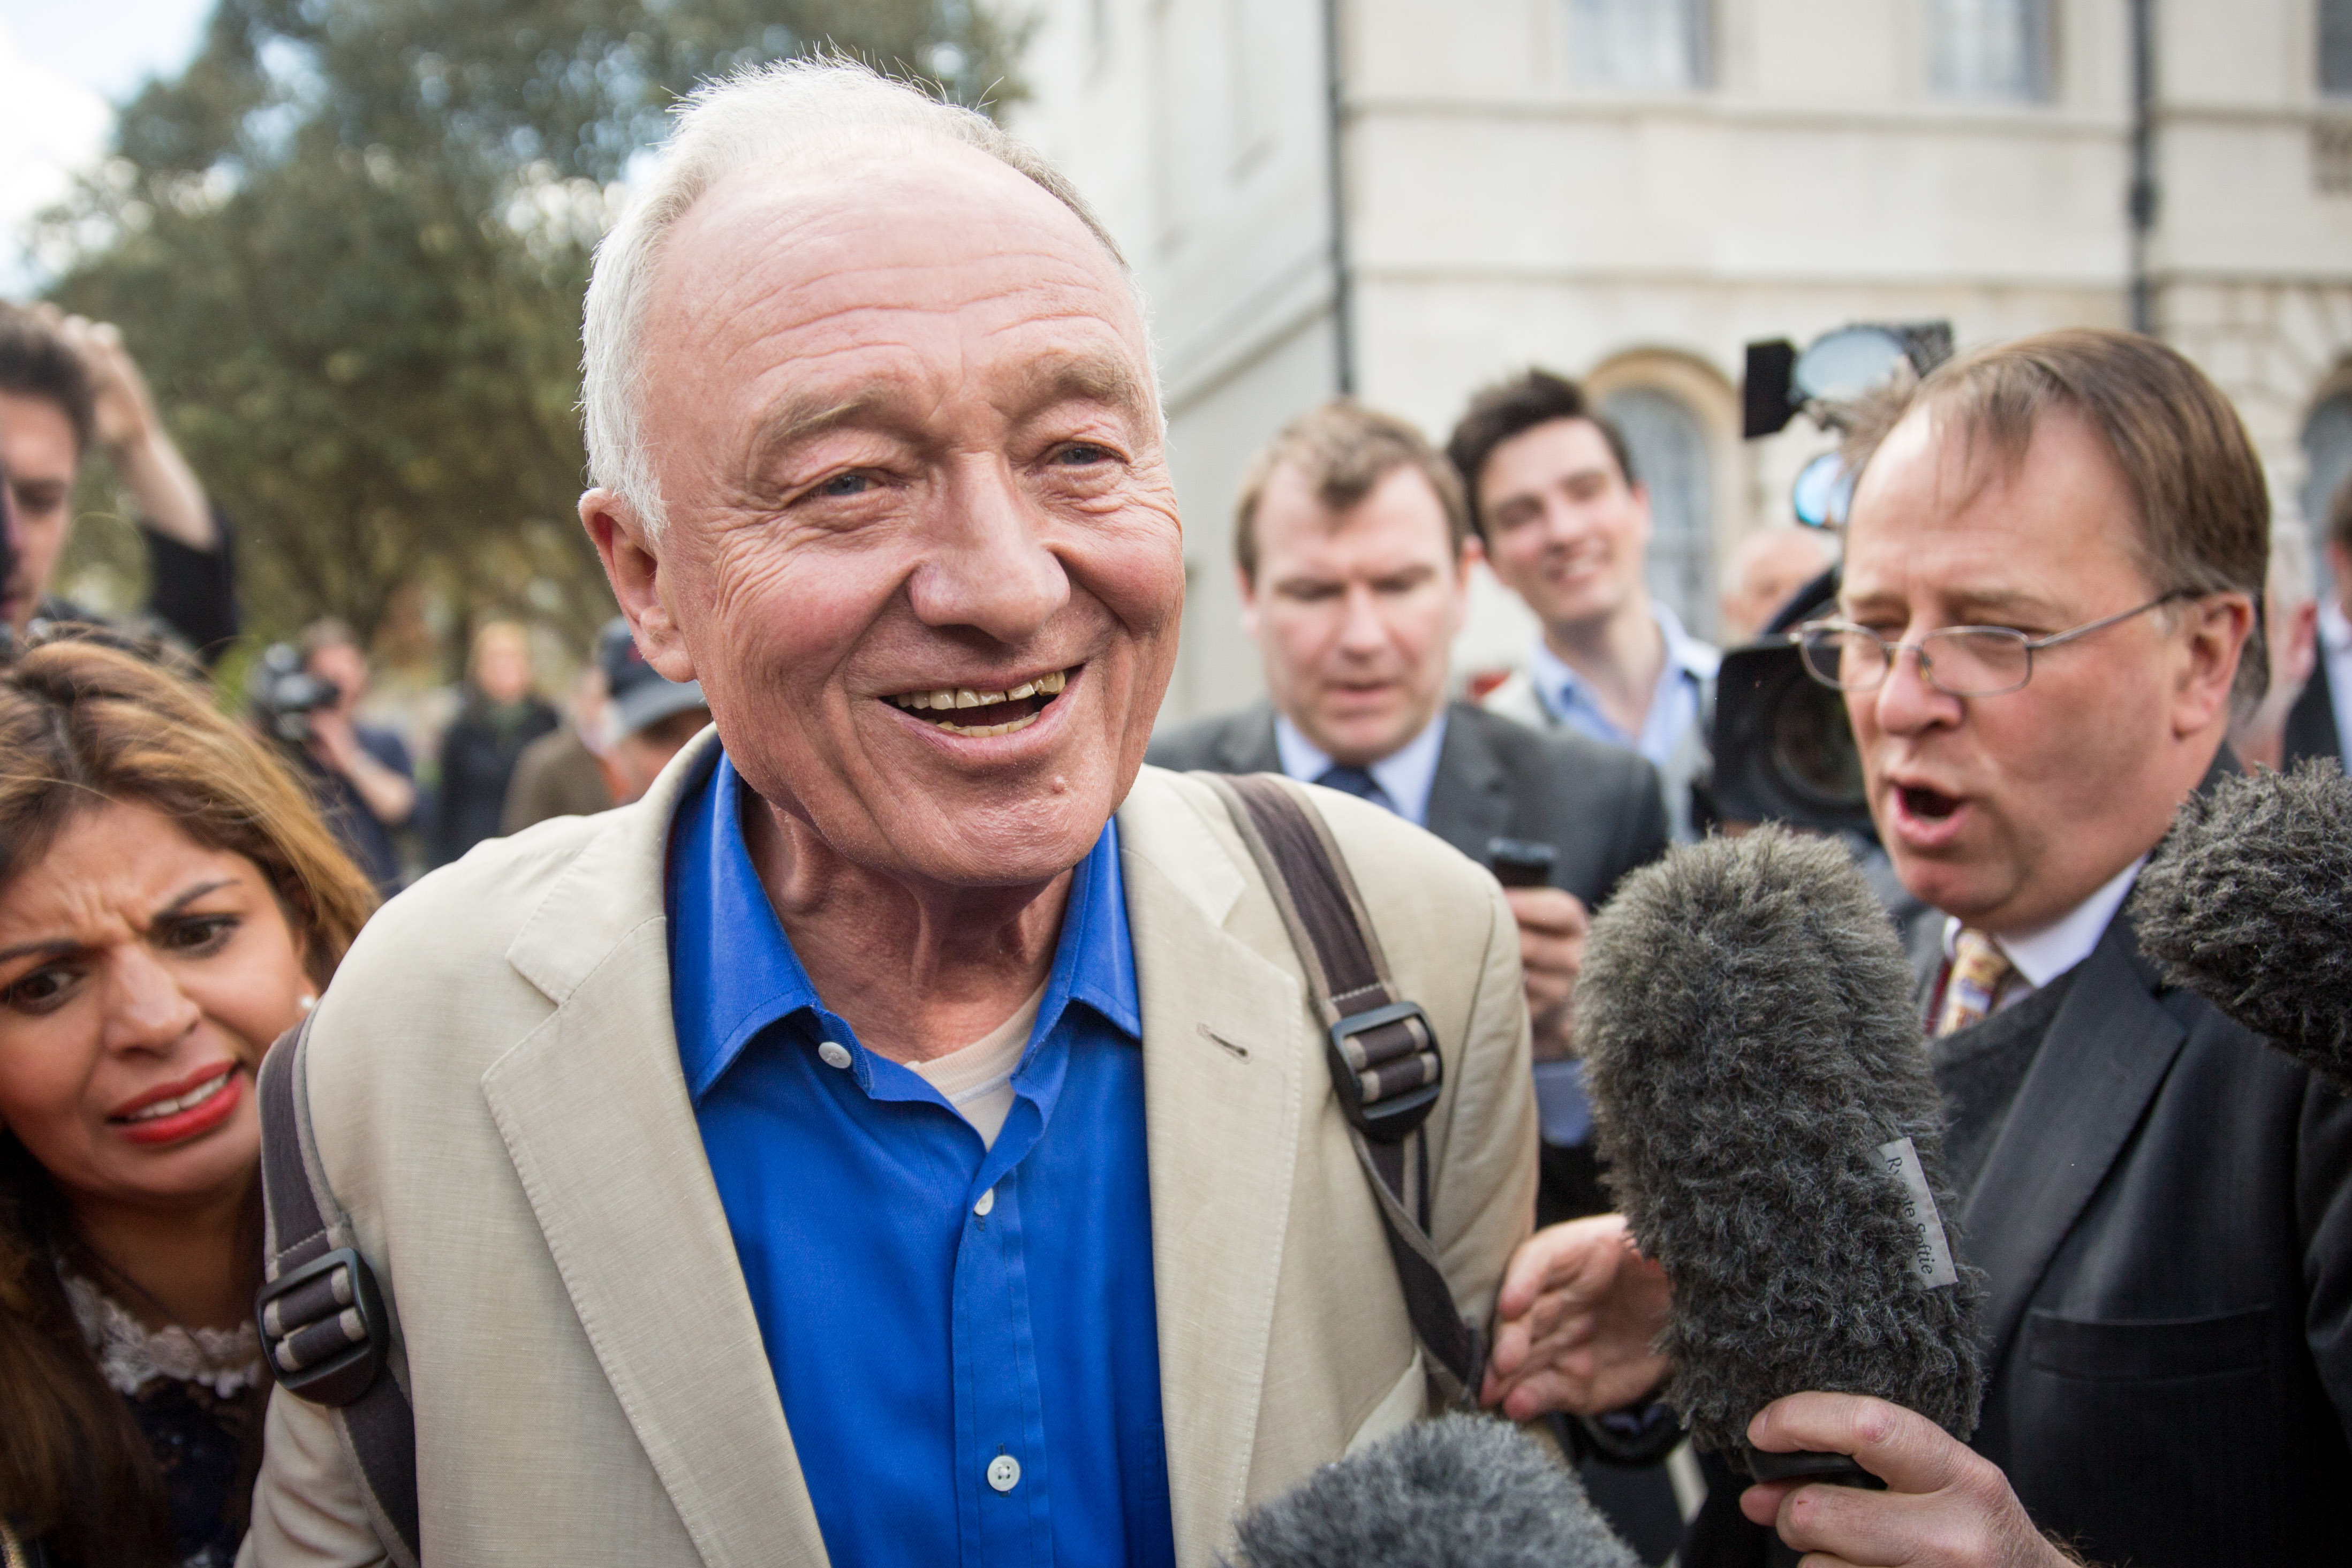 Ken Livingstone speaks to reporters as he leaves Milbank Studios on April 28, 2016 in London, England. Mr Livingstone has been suspended from Labour Party for comments made while defending Naz Shah, the Labour MP suspended over 'anti-Semitic' comments. 